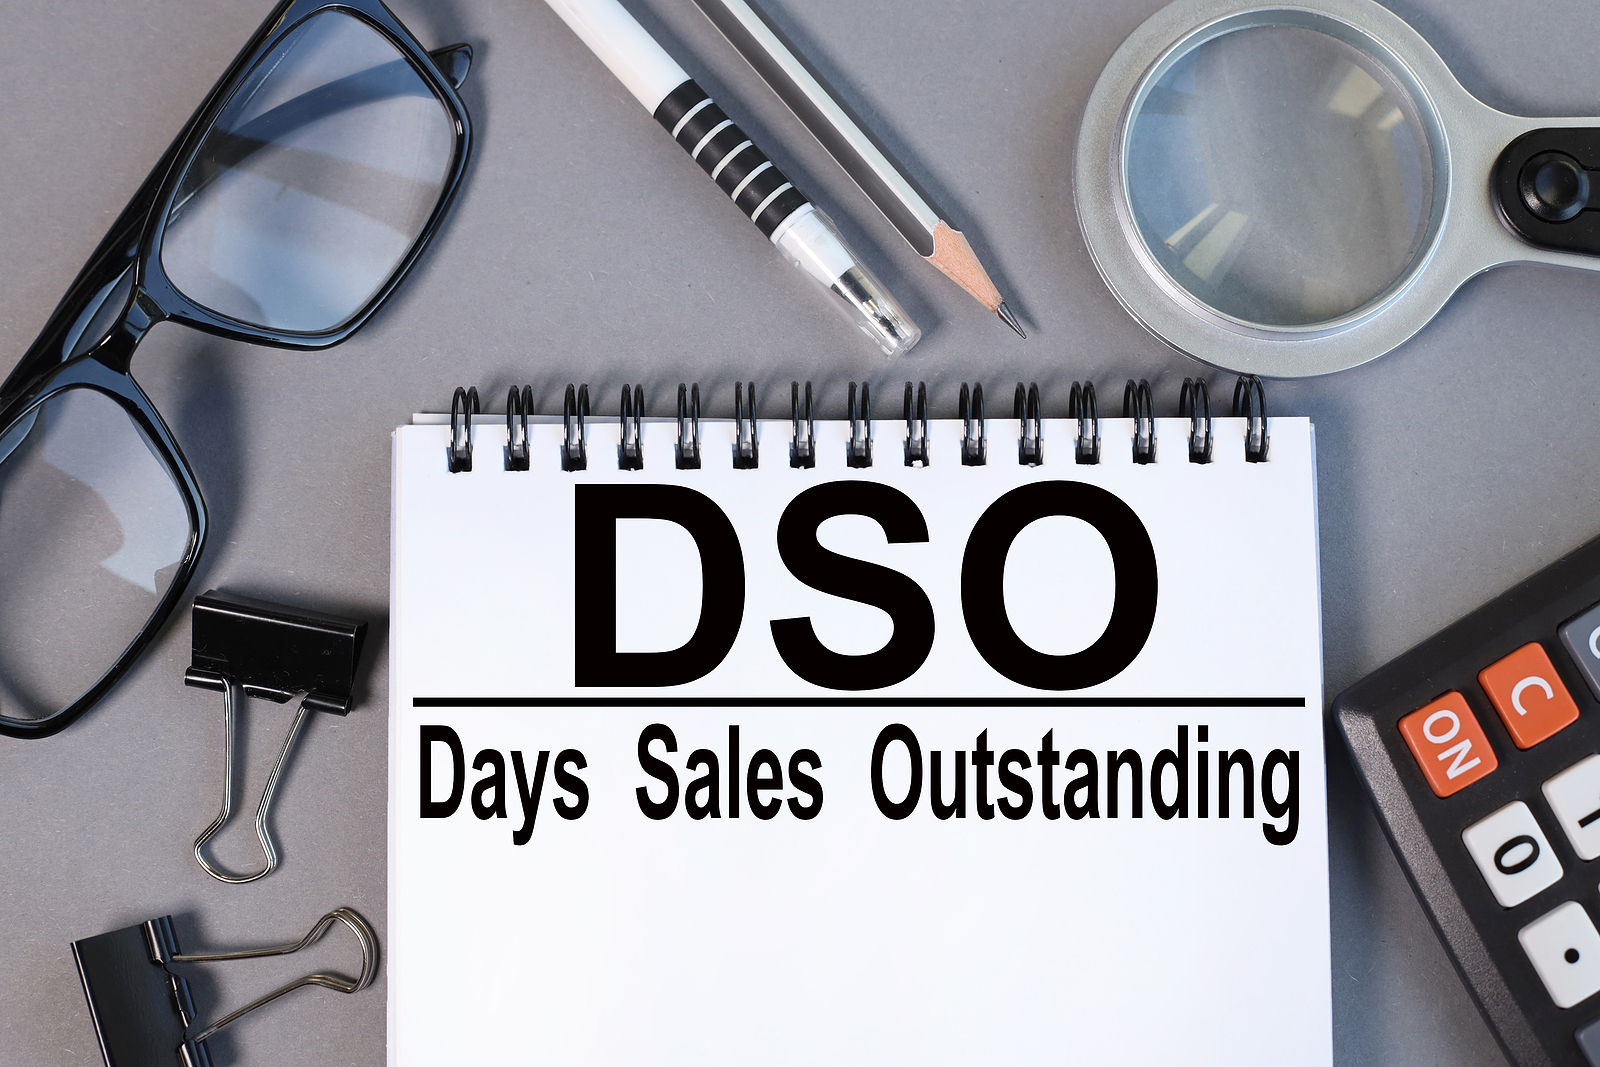 DSO Has Its Merits, But Not for Collections Performance